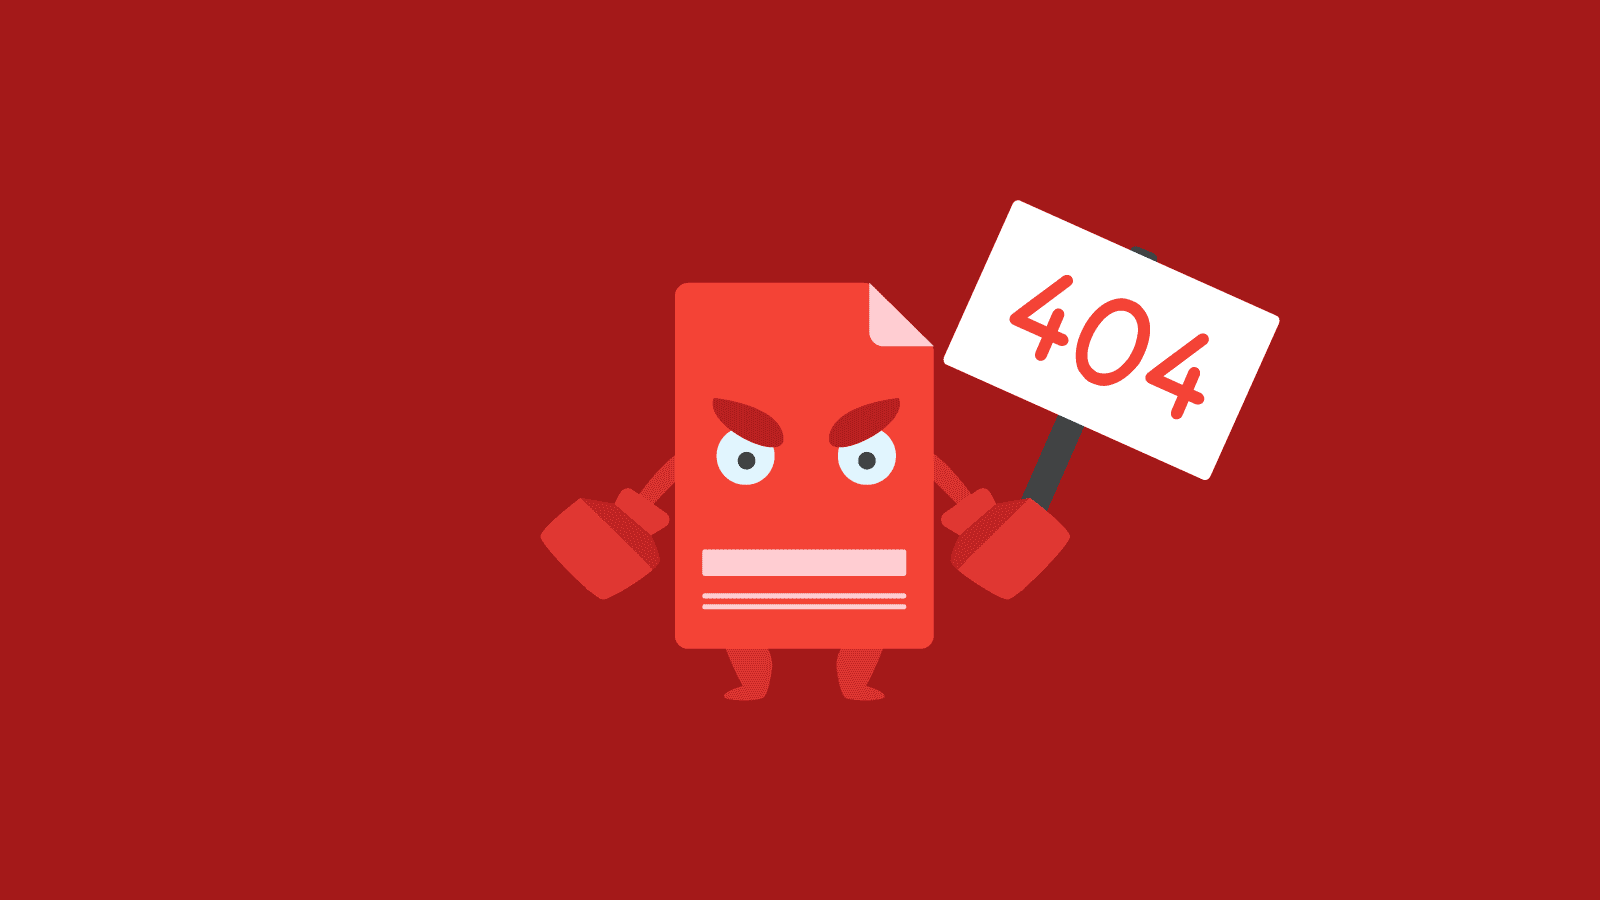 Learn more about the 404 Error Adobe Muse widget